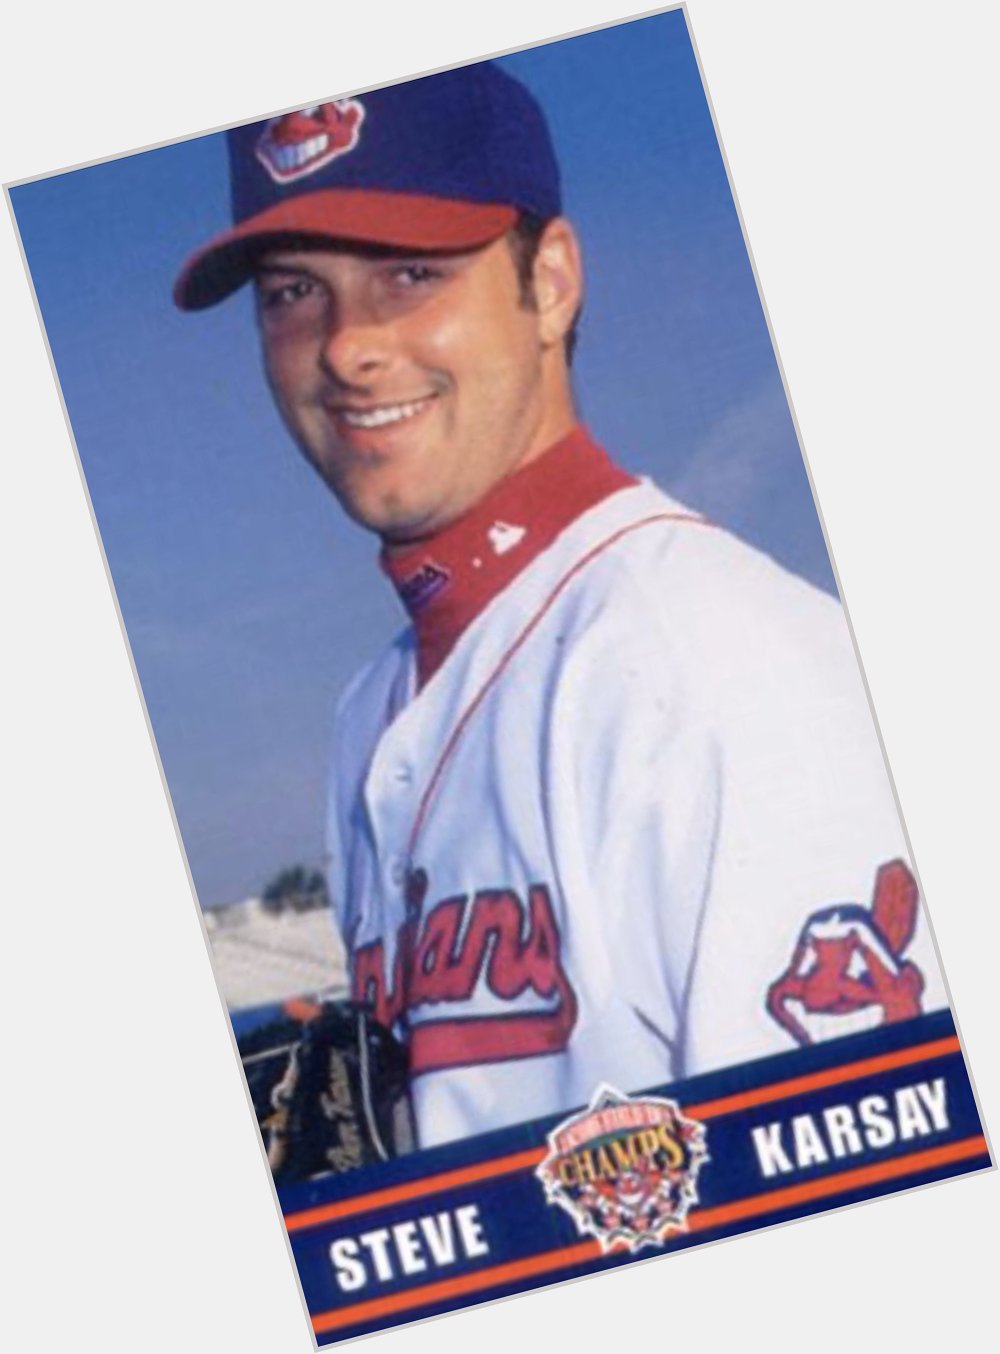 Big happy birthday to former middle reliever Steve Karsay! He turns 48 today! Wow! 